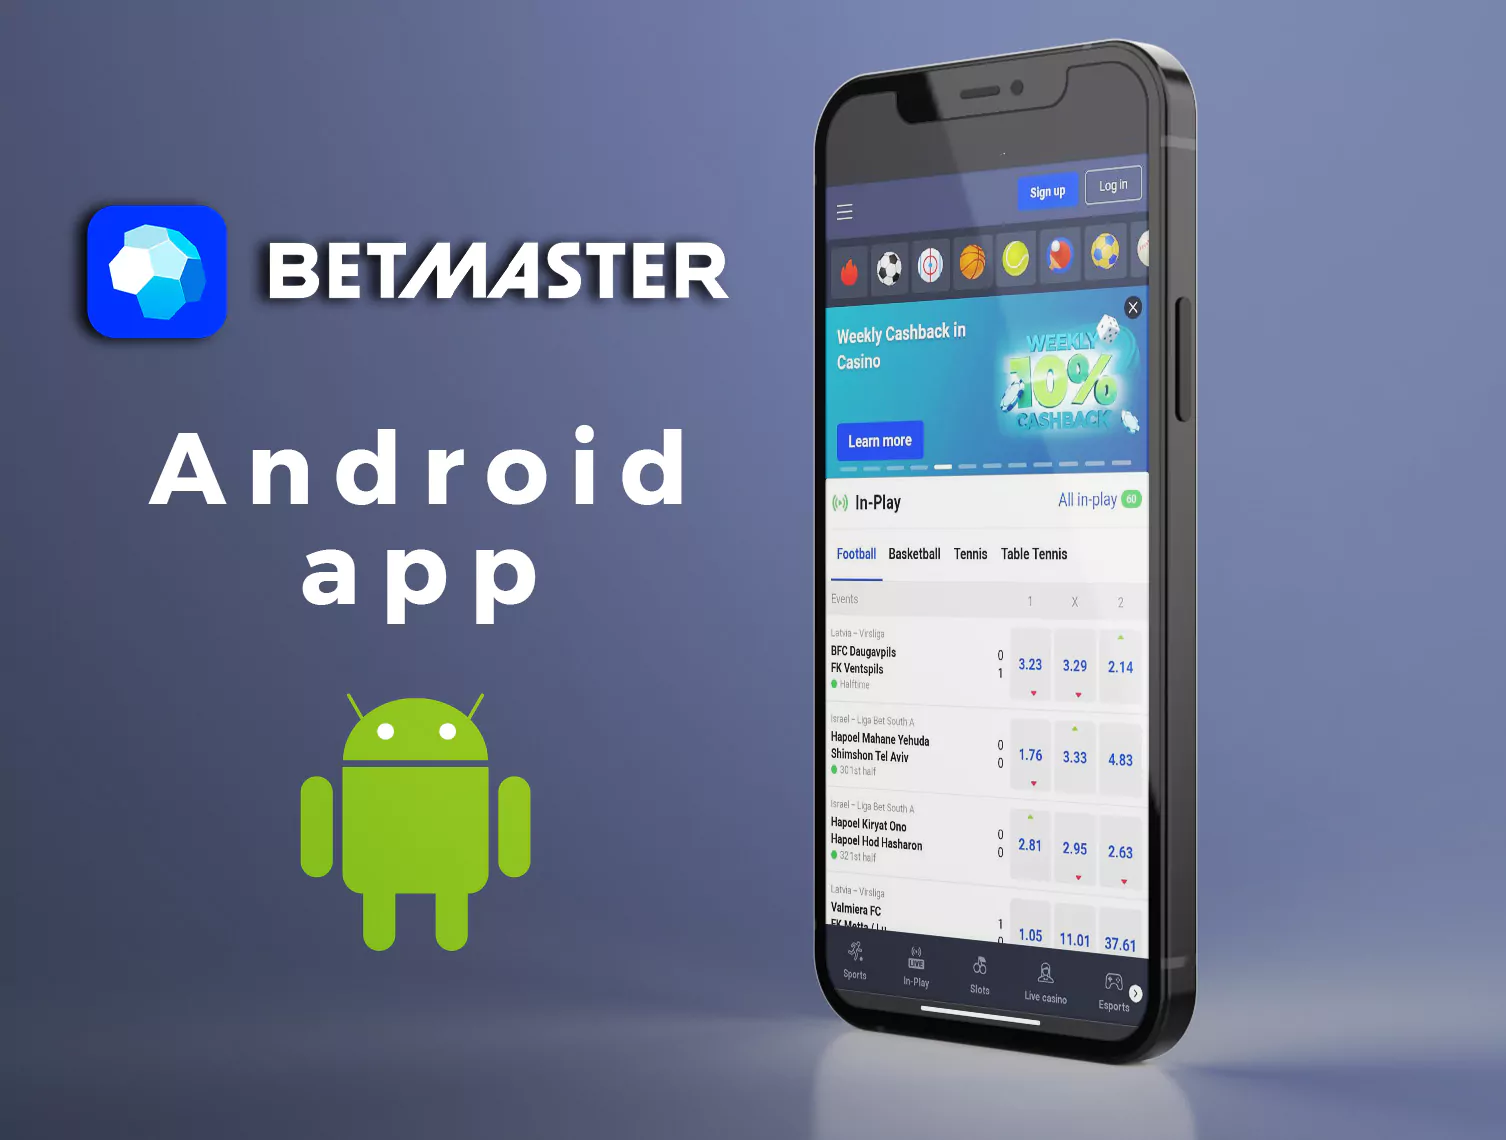 Download the Betmaster Android app to place bets whenever you want.